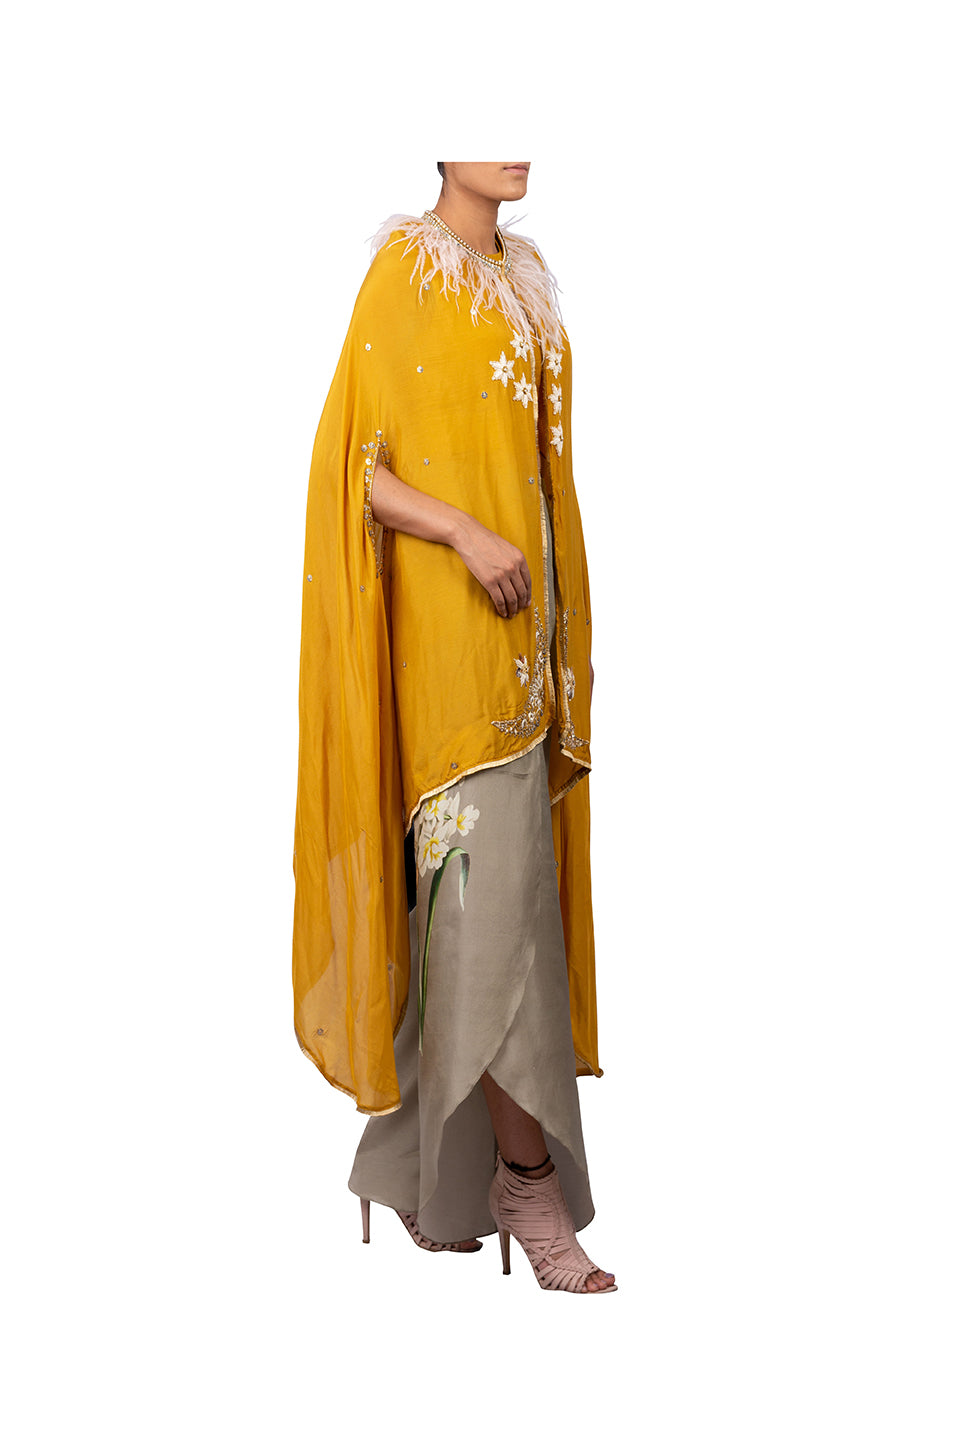 STAR MOON EMBROIDERED CAPE WITH RAW SILK CROPTOP